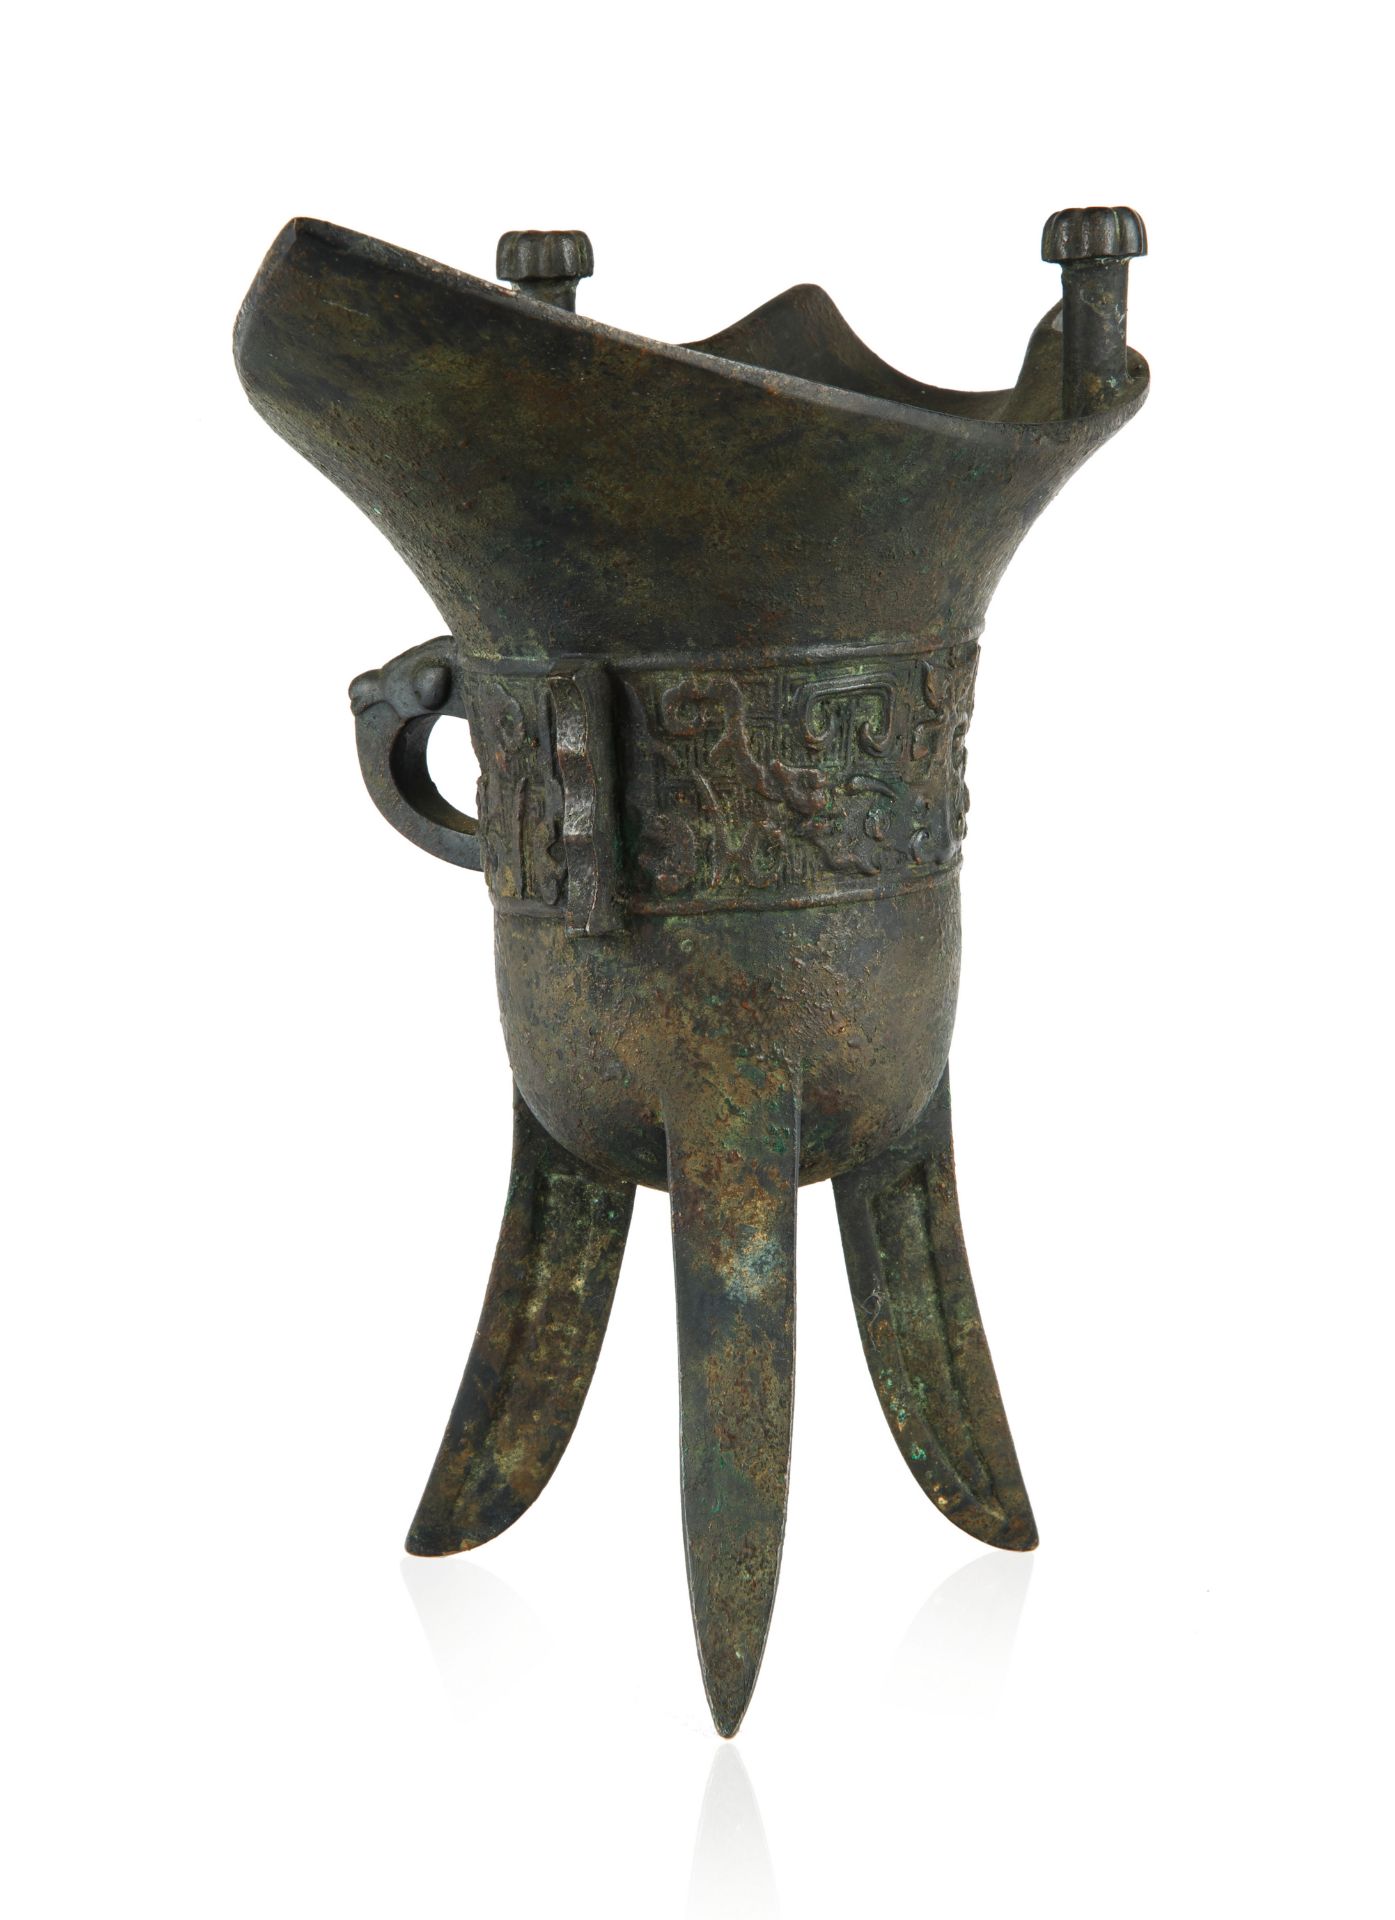 A CHINESE ARCHAIC-STYLE JUE RITUAL WINE VESSEL - Image 2 of 4